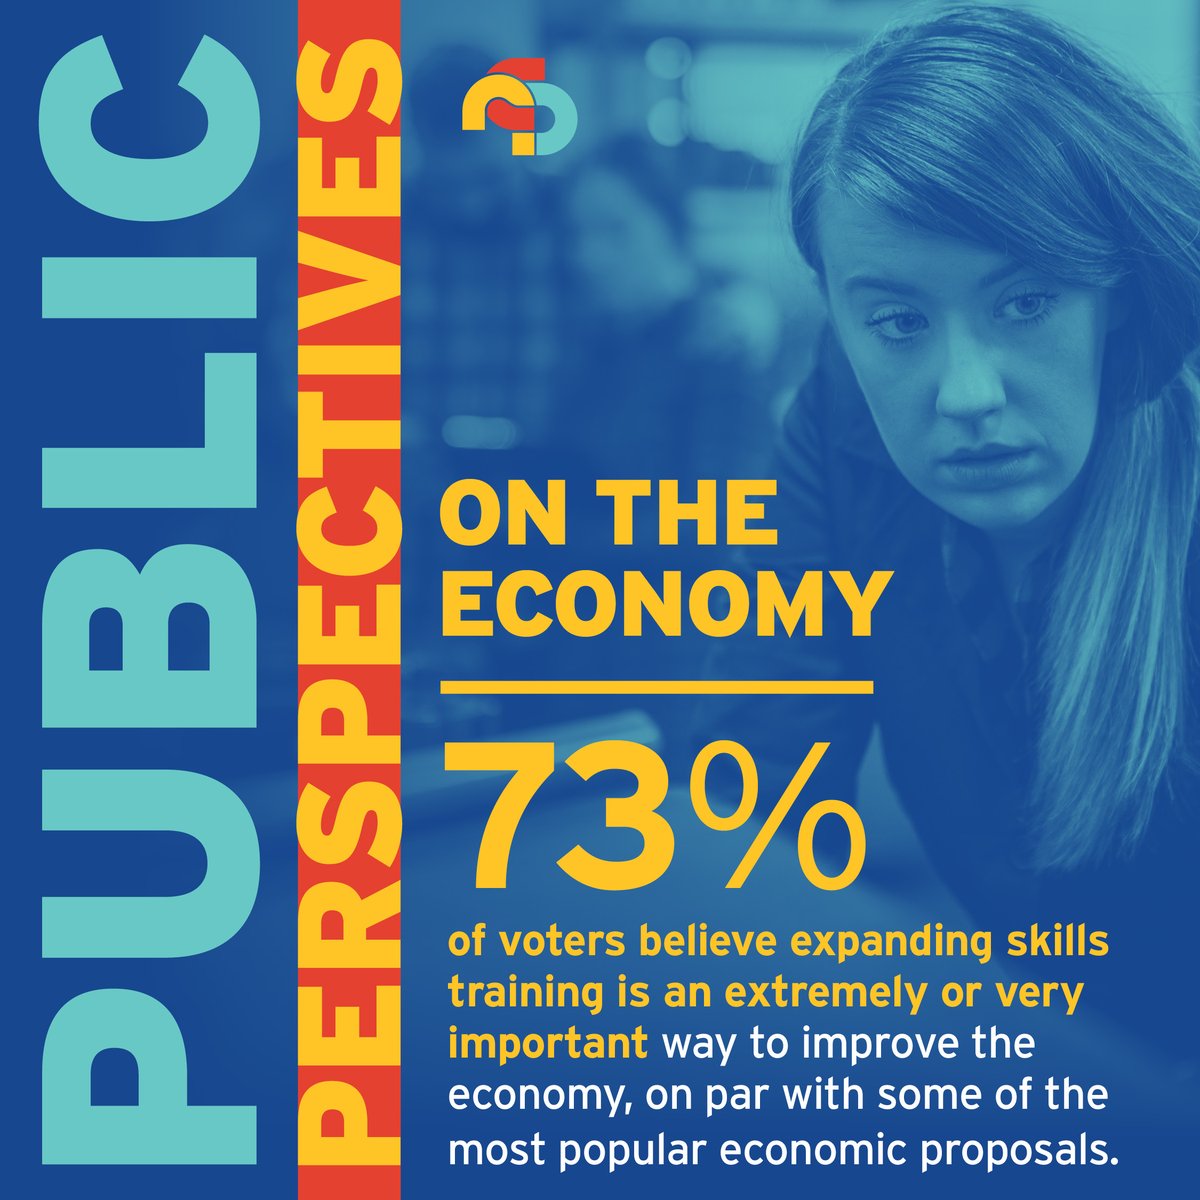 Voters from different political parties have different perceptions of the economy. But they do agree on #skillstraining as an economic solution. nationalskillscoalition.org/public-perspec…